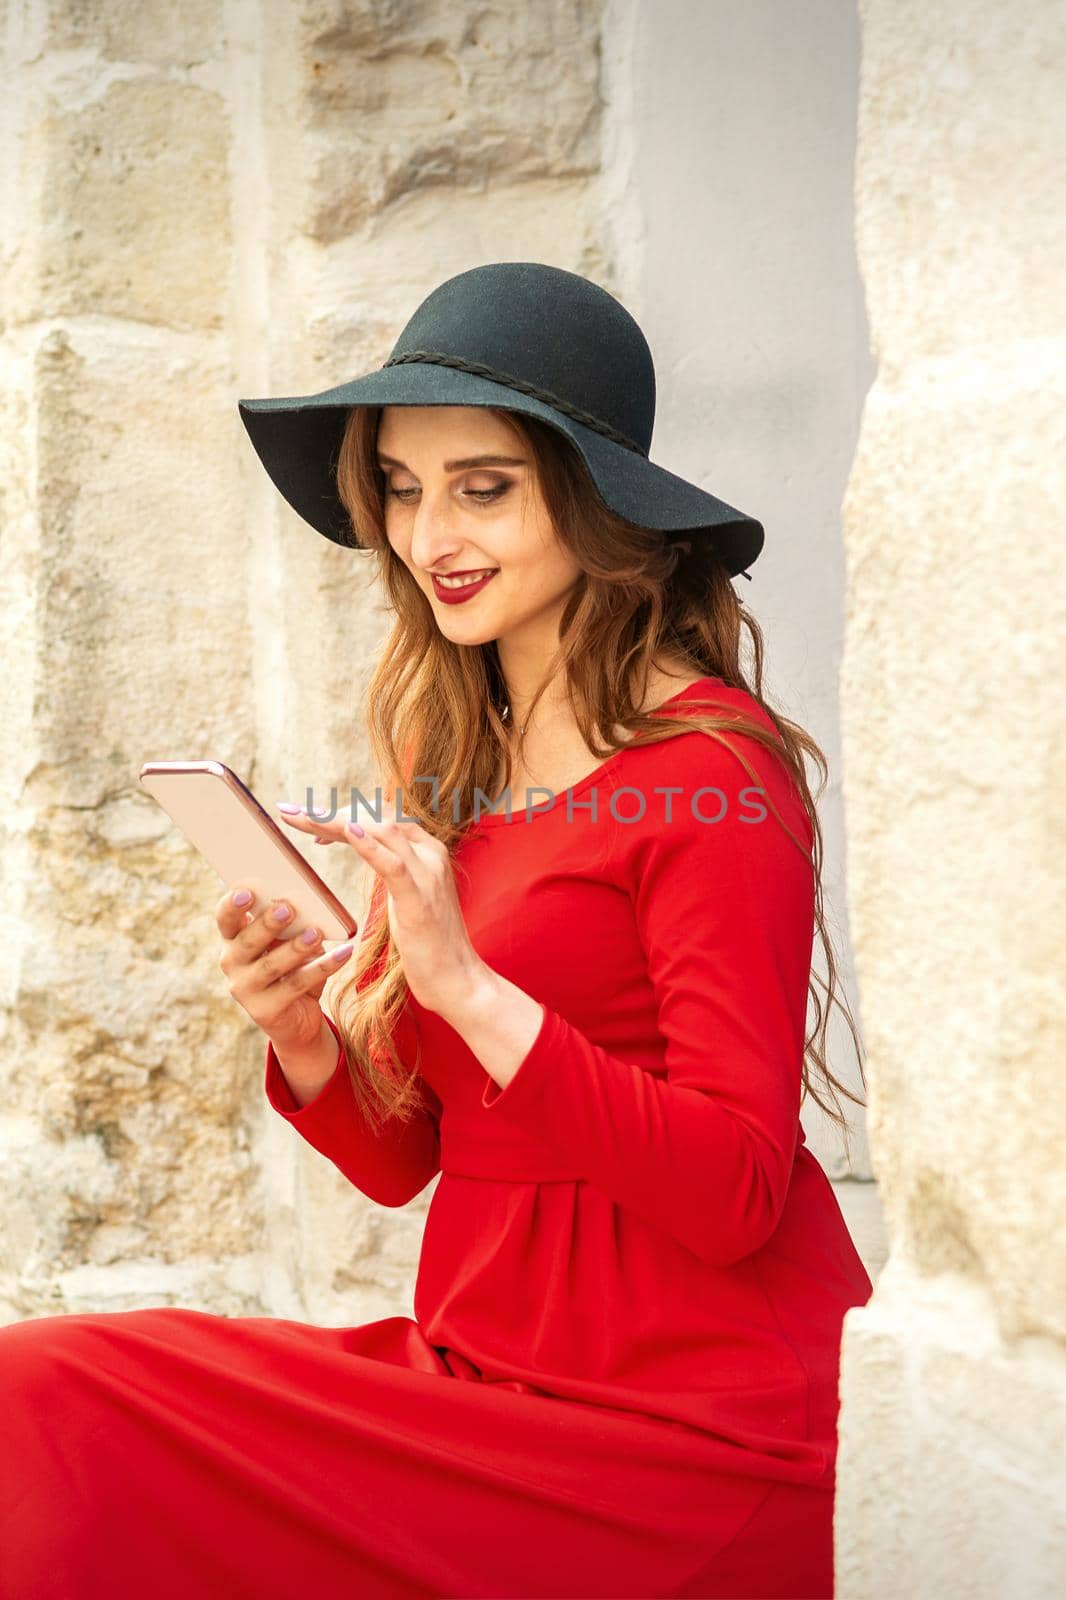 A young traveling white woman in the red jacket and black hat sitting with a smartphone on the city street. by okskukuruza